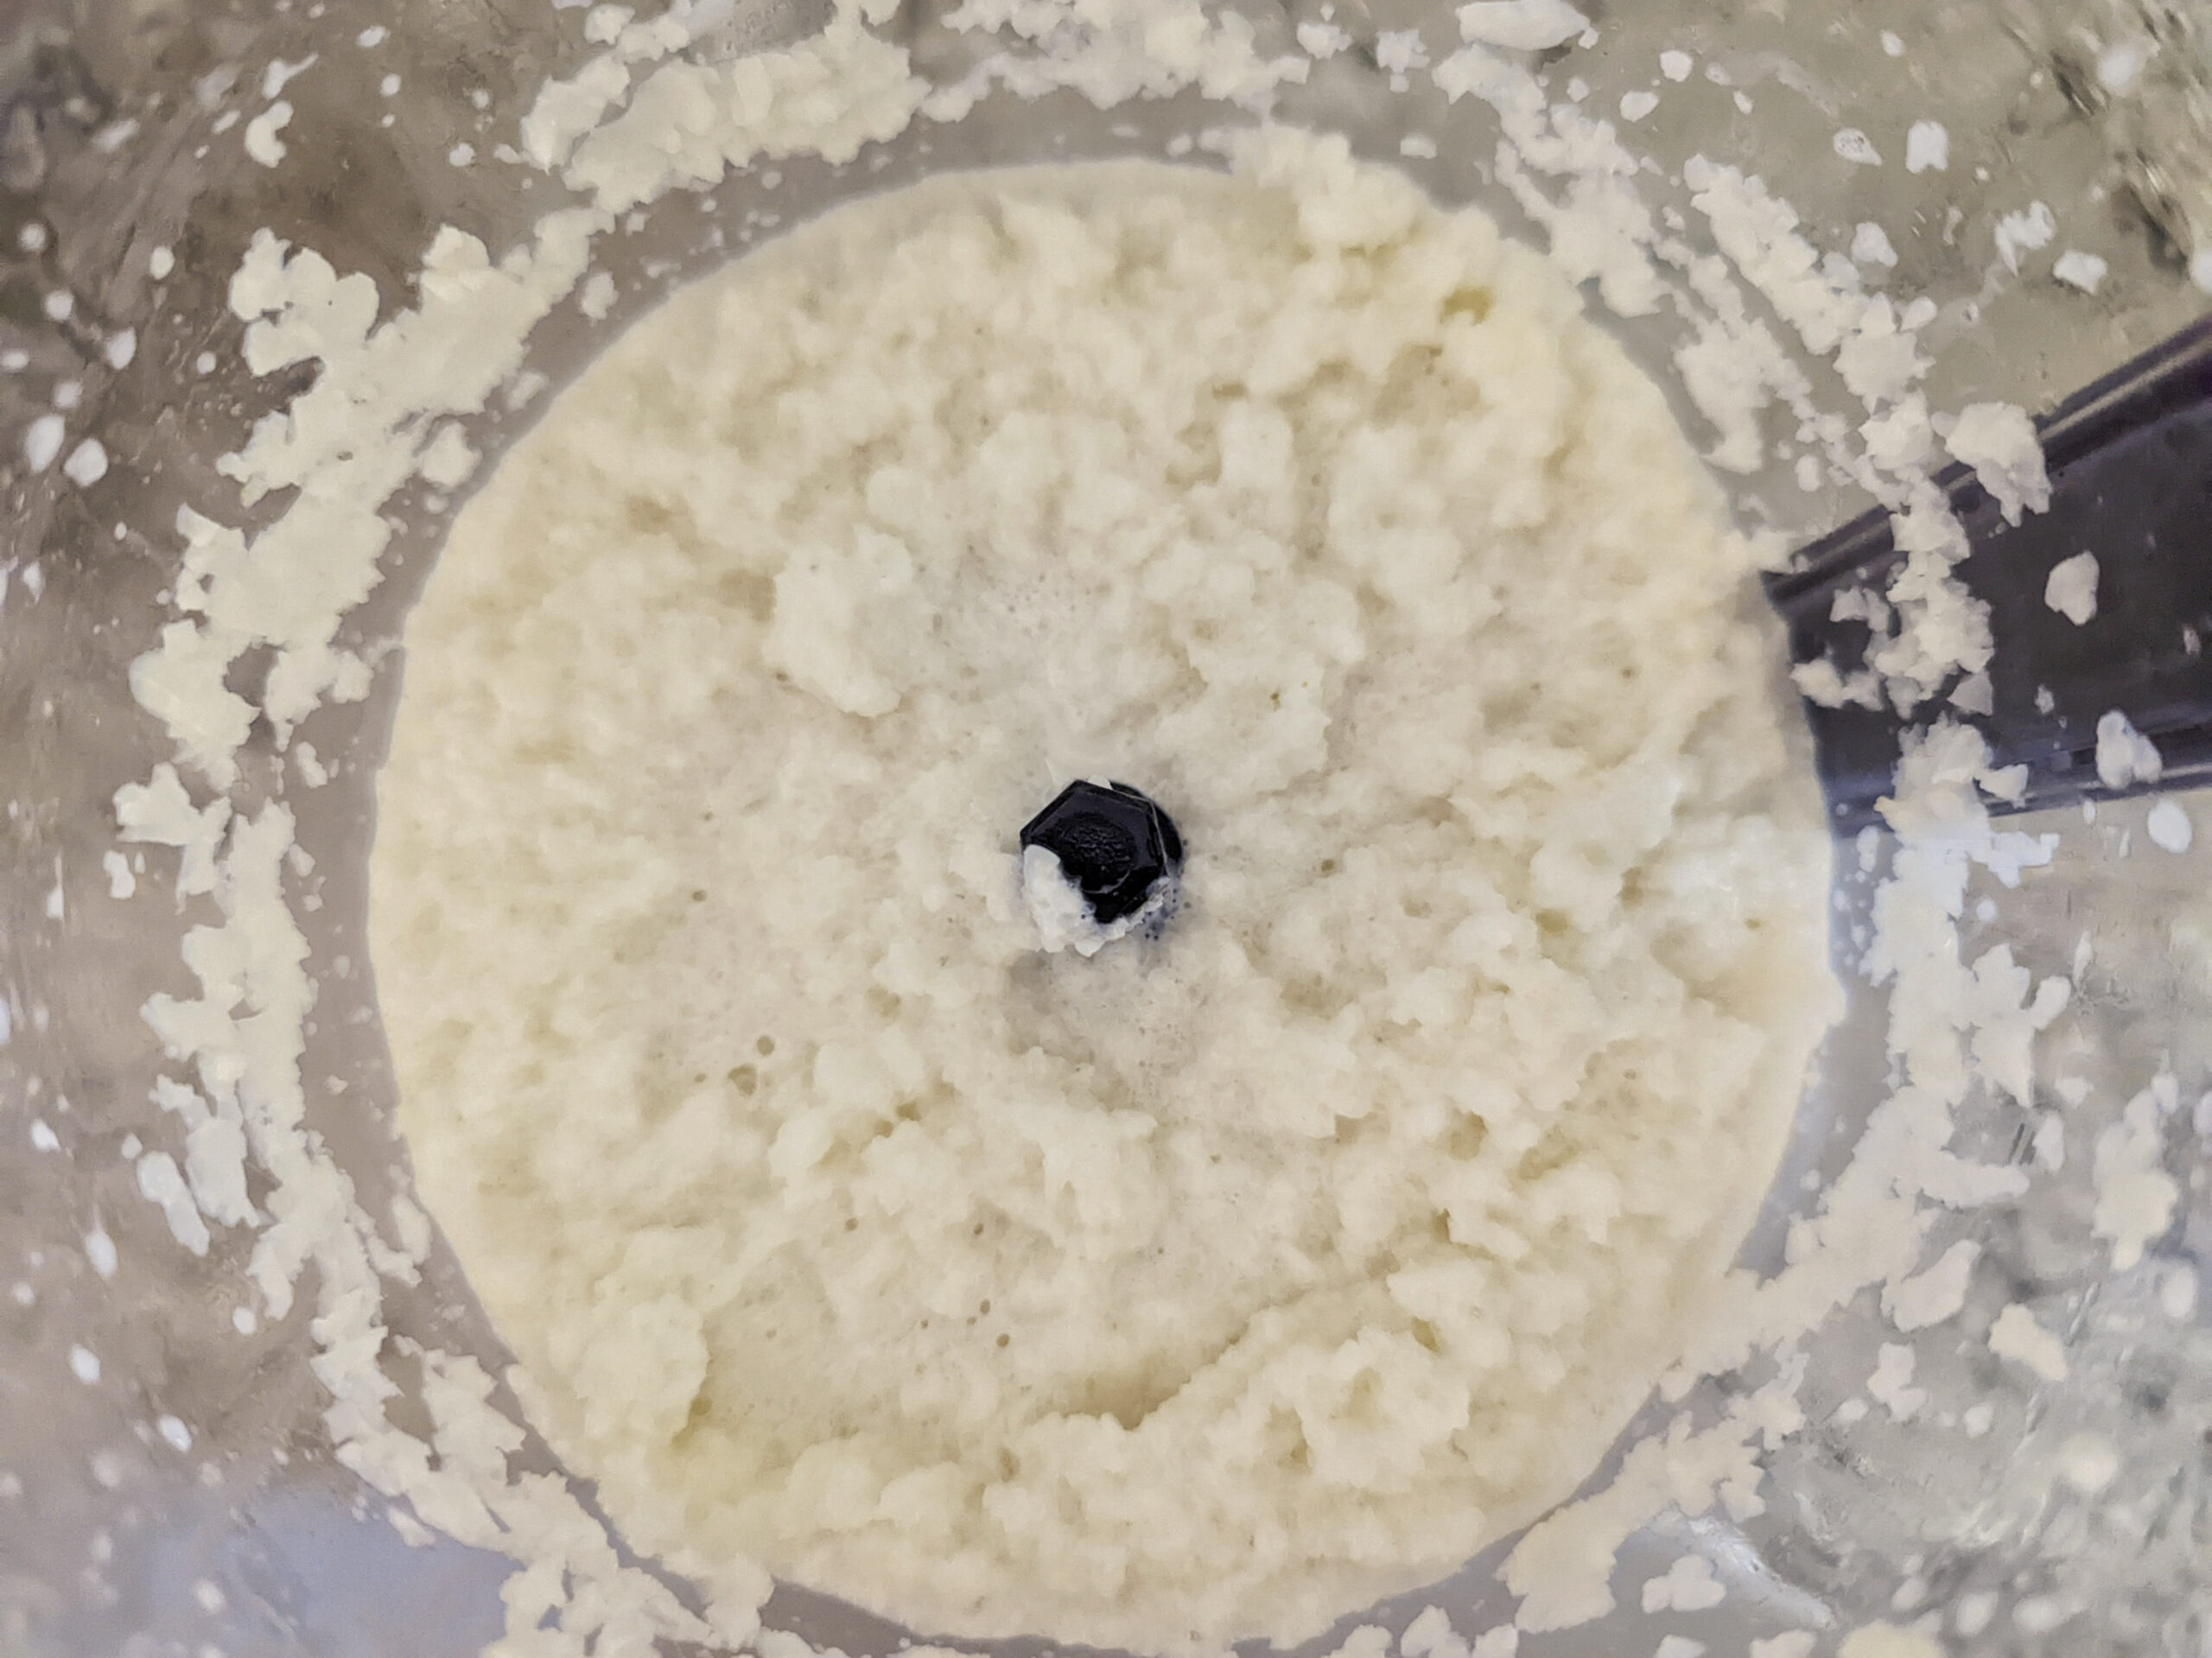 Place the tender cauliflower into the food processor to finish the mashed cauliflower recipe.